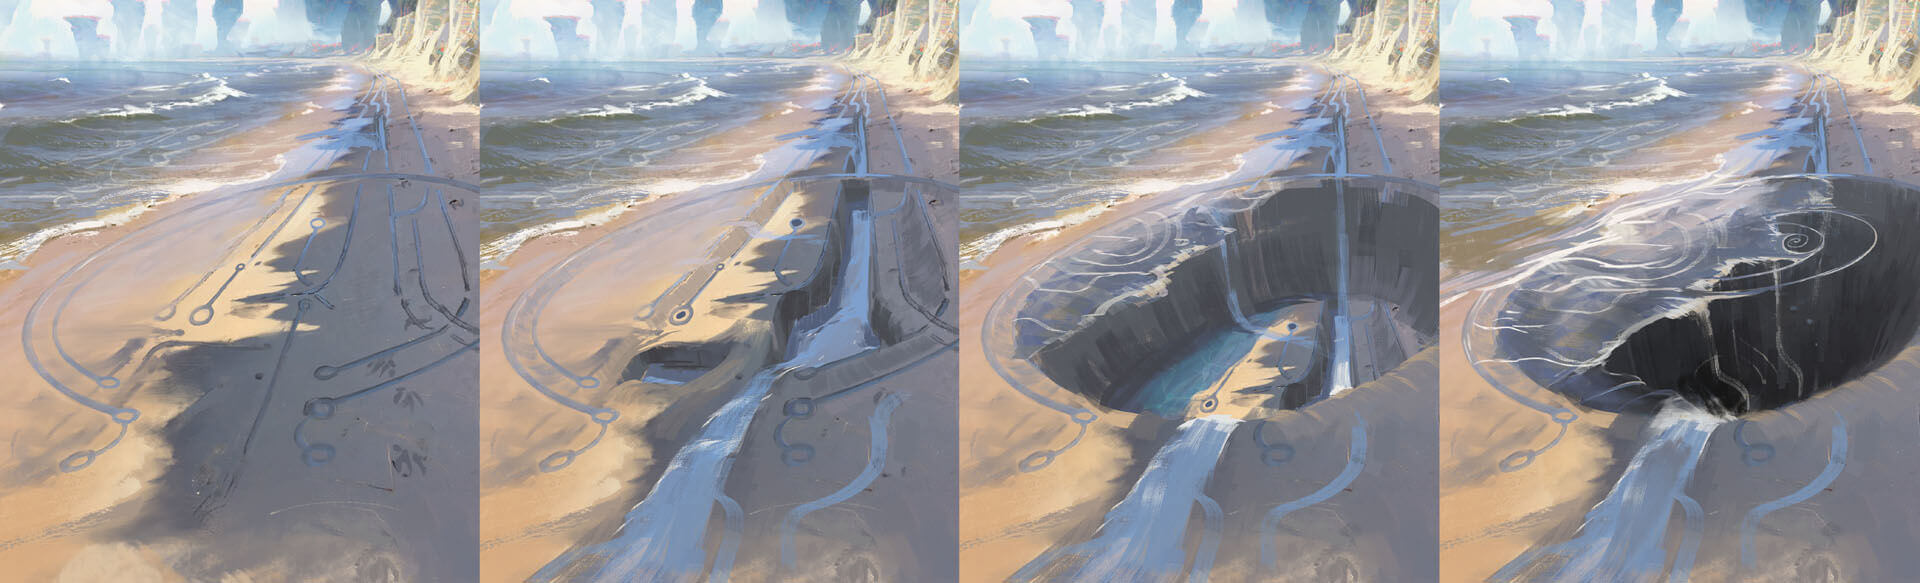 This low tide provides access for Yordles to use portal through underwater cavern to Bandle City